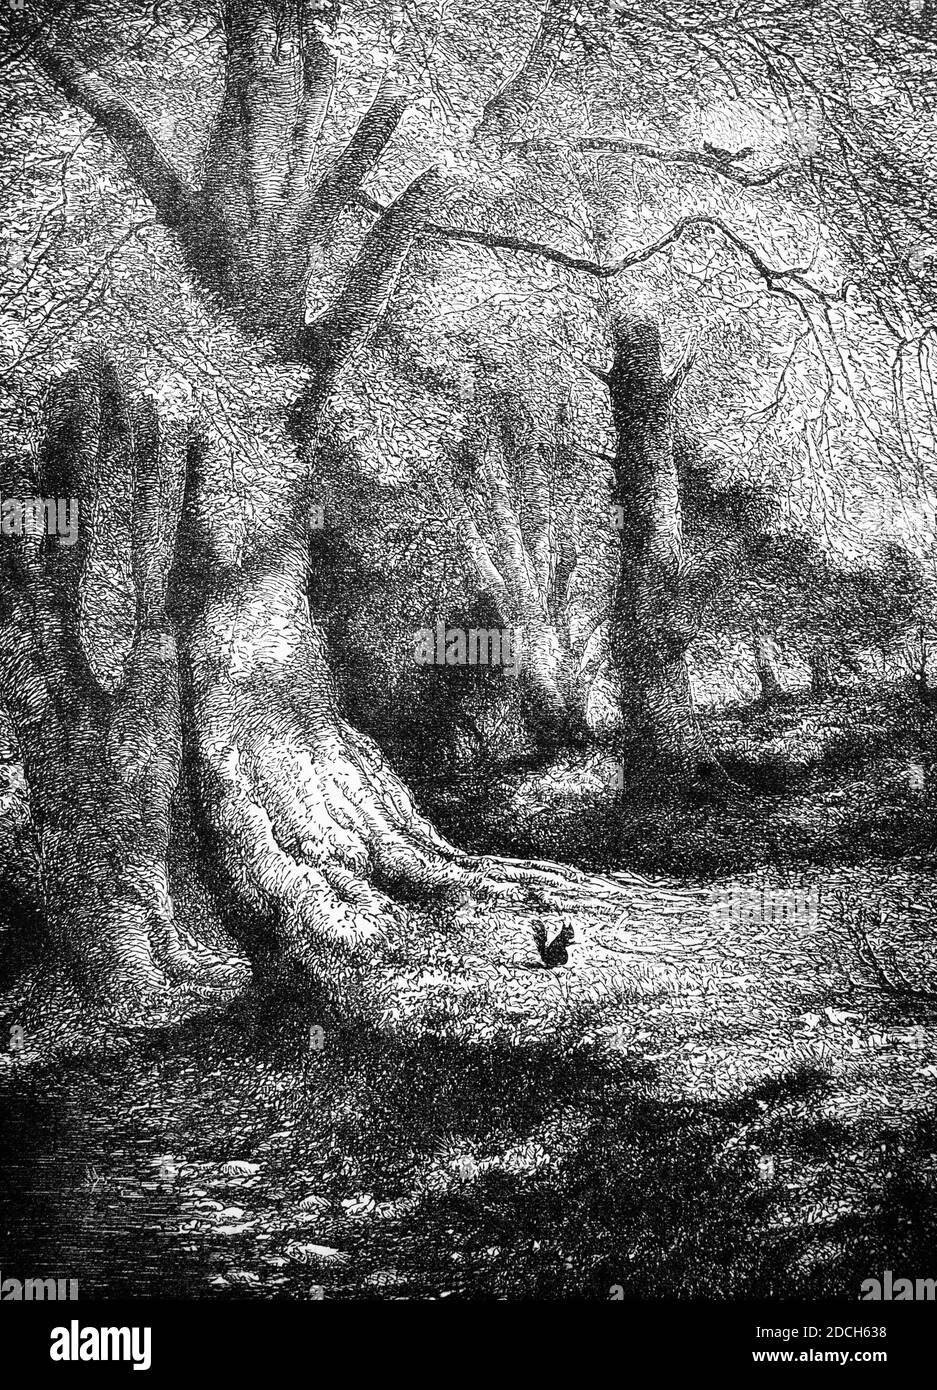 A 19th Century view of a glade in the New Forest, one of the largest remaining tracts of heathland and forest in Southern England, covering southwest Hampshire and southeast Wiltshire. It was proclaimed a royal forest by William the Conqueror, featuring in the Domesday Book and during the 18th century, became a source of timber for the Royal Navy. It remains a habitat for many rare birds and mammals including the squirrels in the illustration. Stock Photo